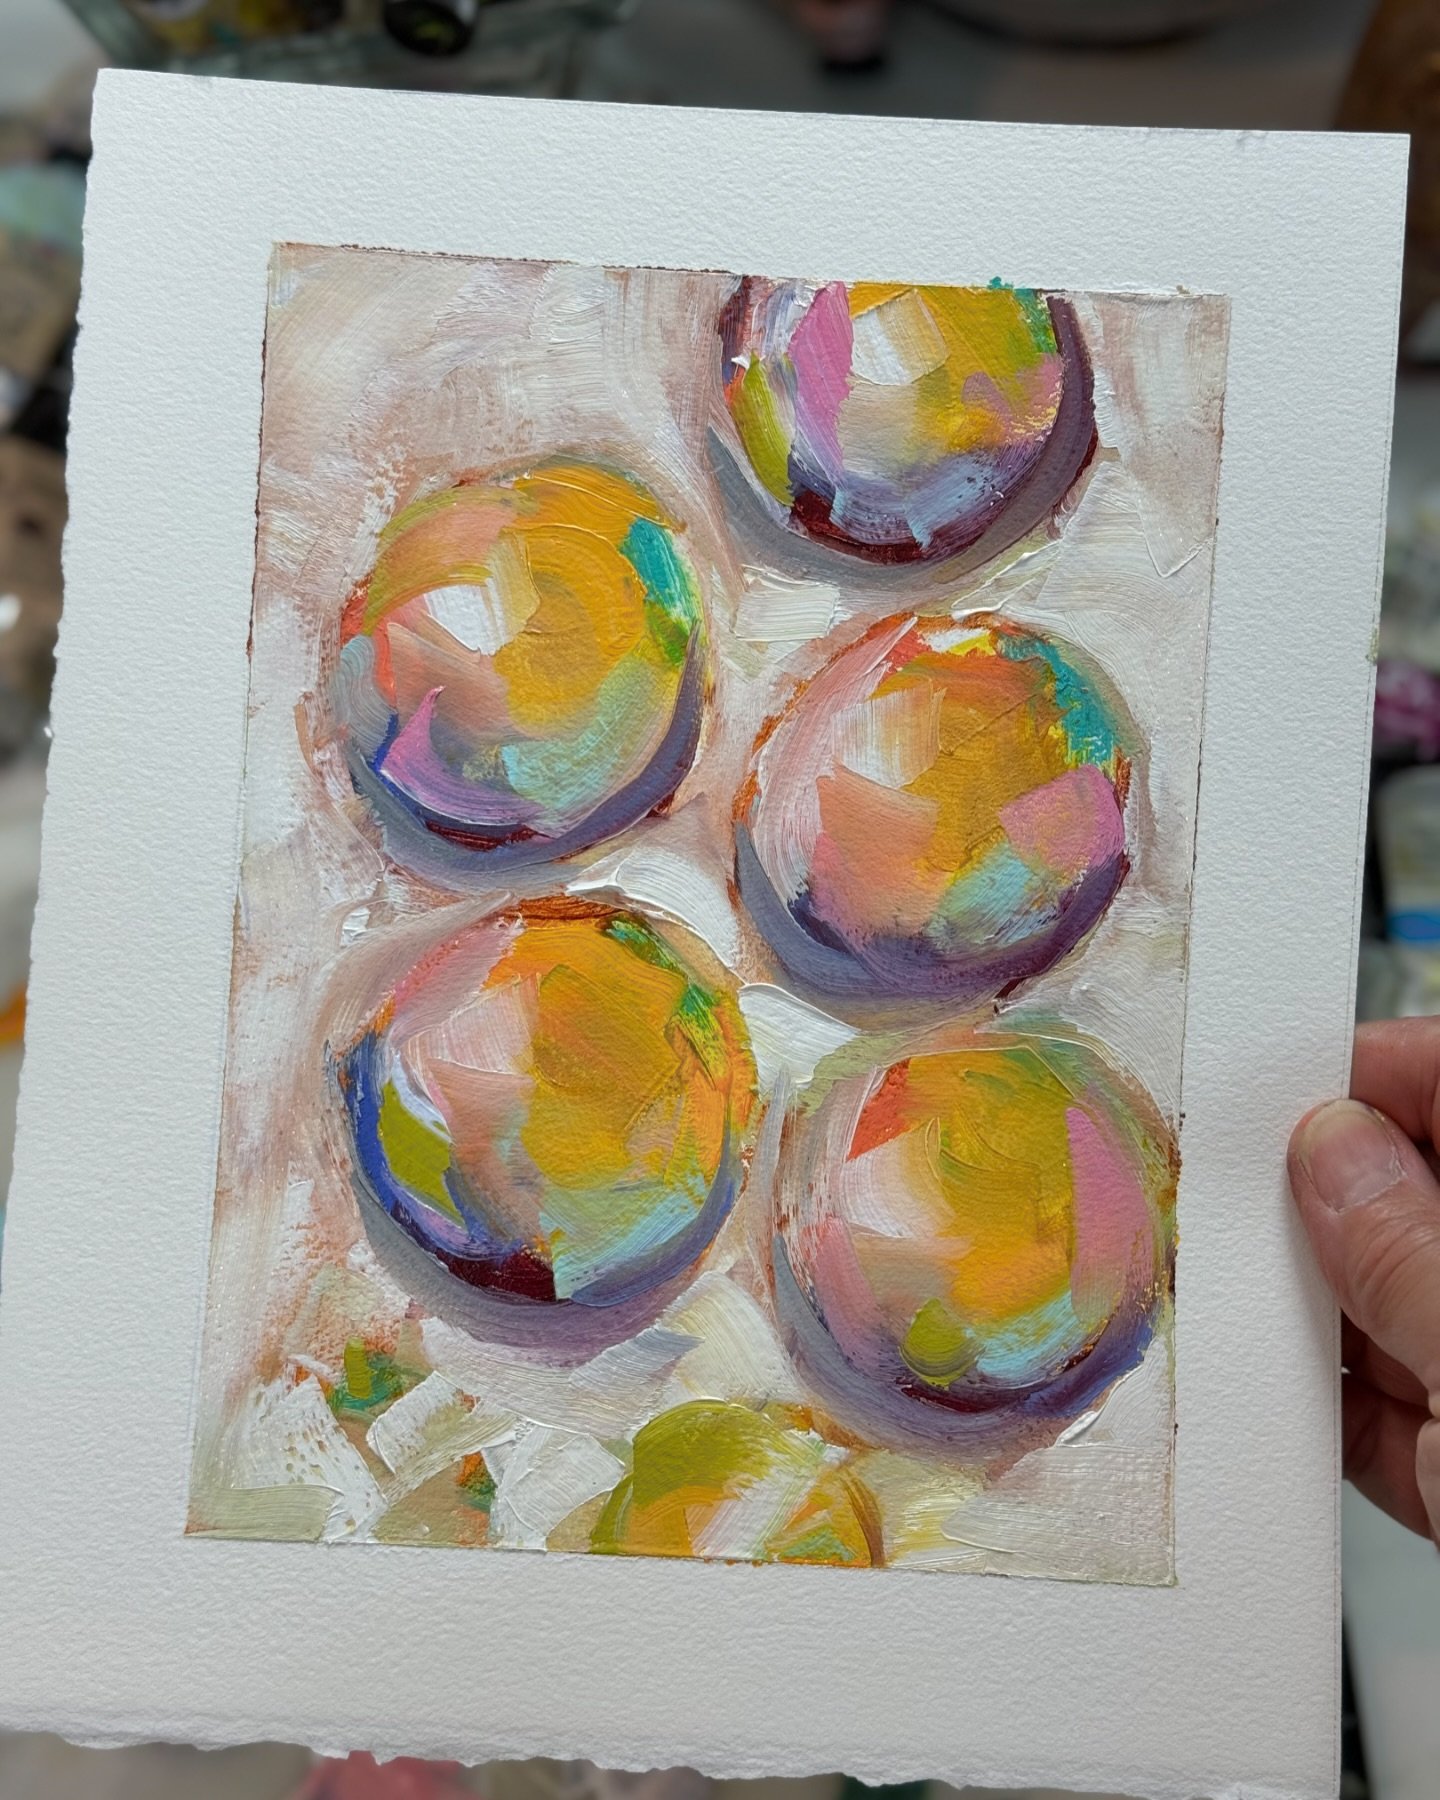 As I pack my art supplies for my live painting demo at Red Raven Art Company I had just enough time for a quick abstract. I think this just wanted to be macaroons, but that was not my intention. Art just takes you on a journey if you slow down and li